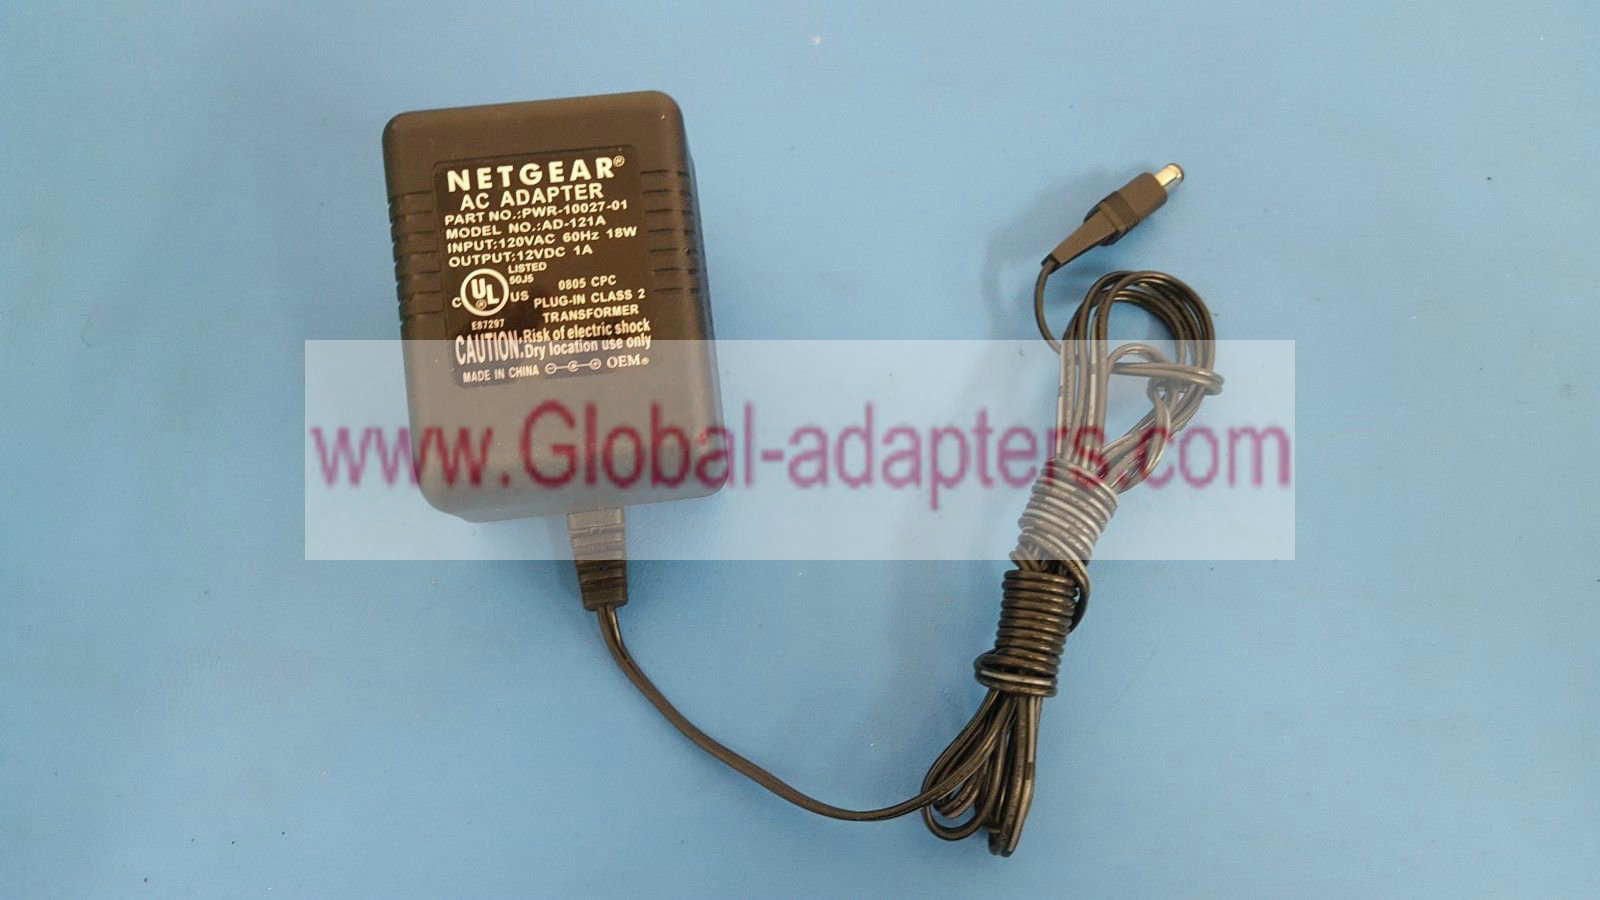 NEW NETGEAR PWR-10027-01 AD-121A1 12VDC 1A AC ADAPTER power supply